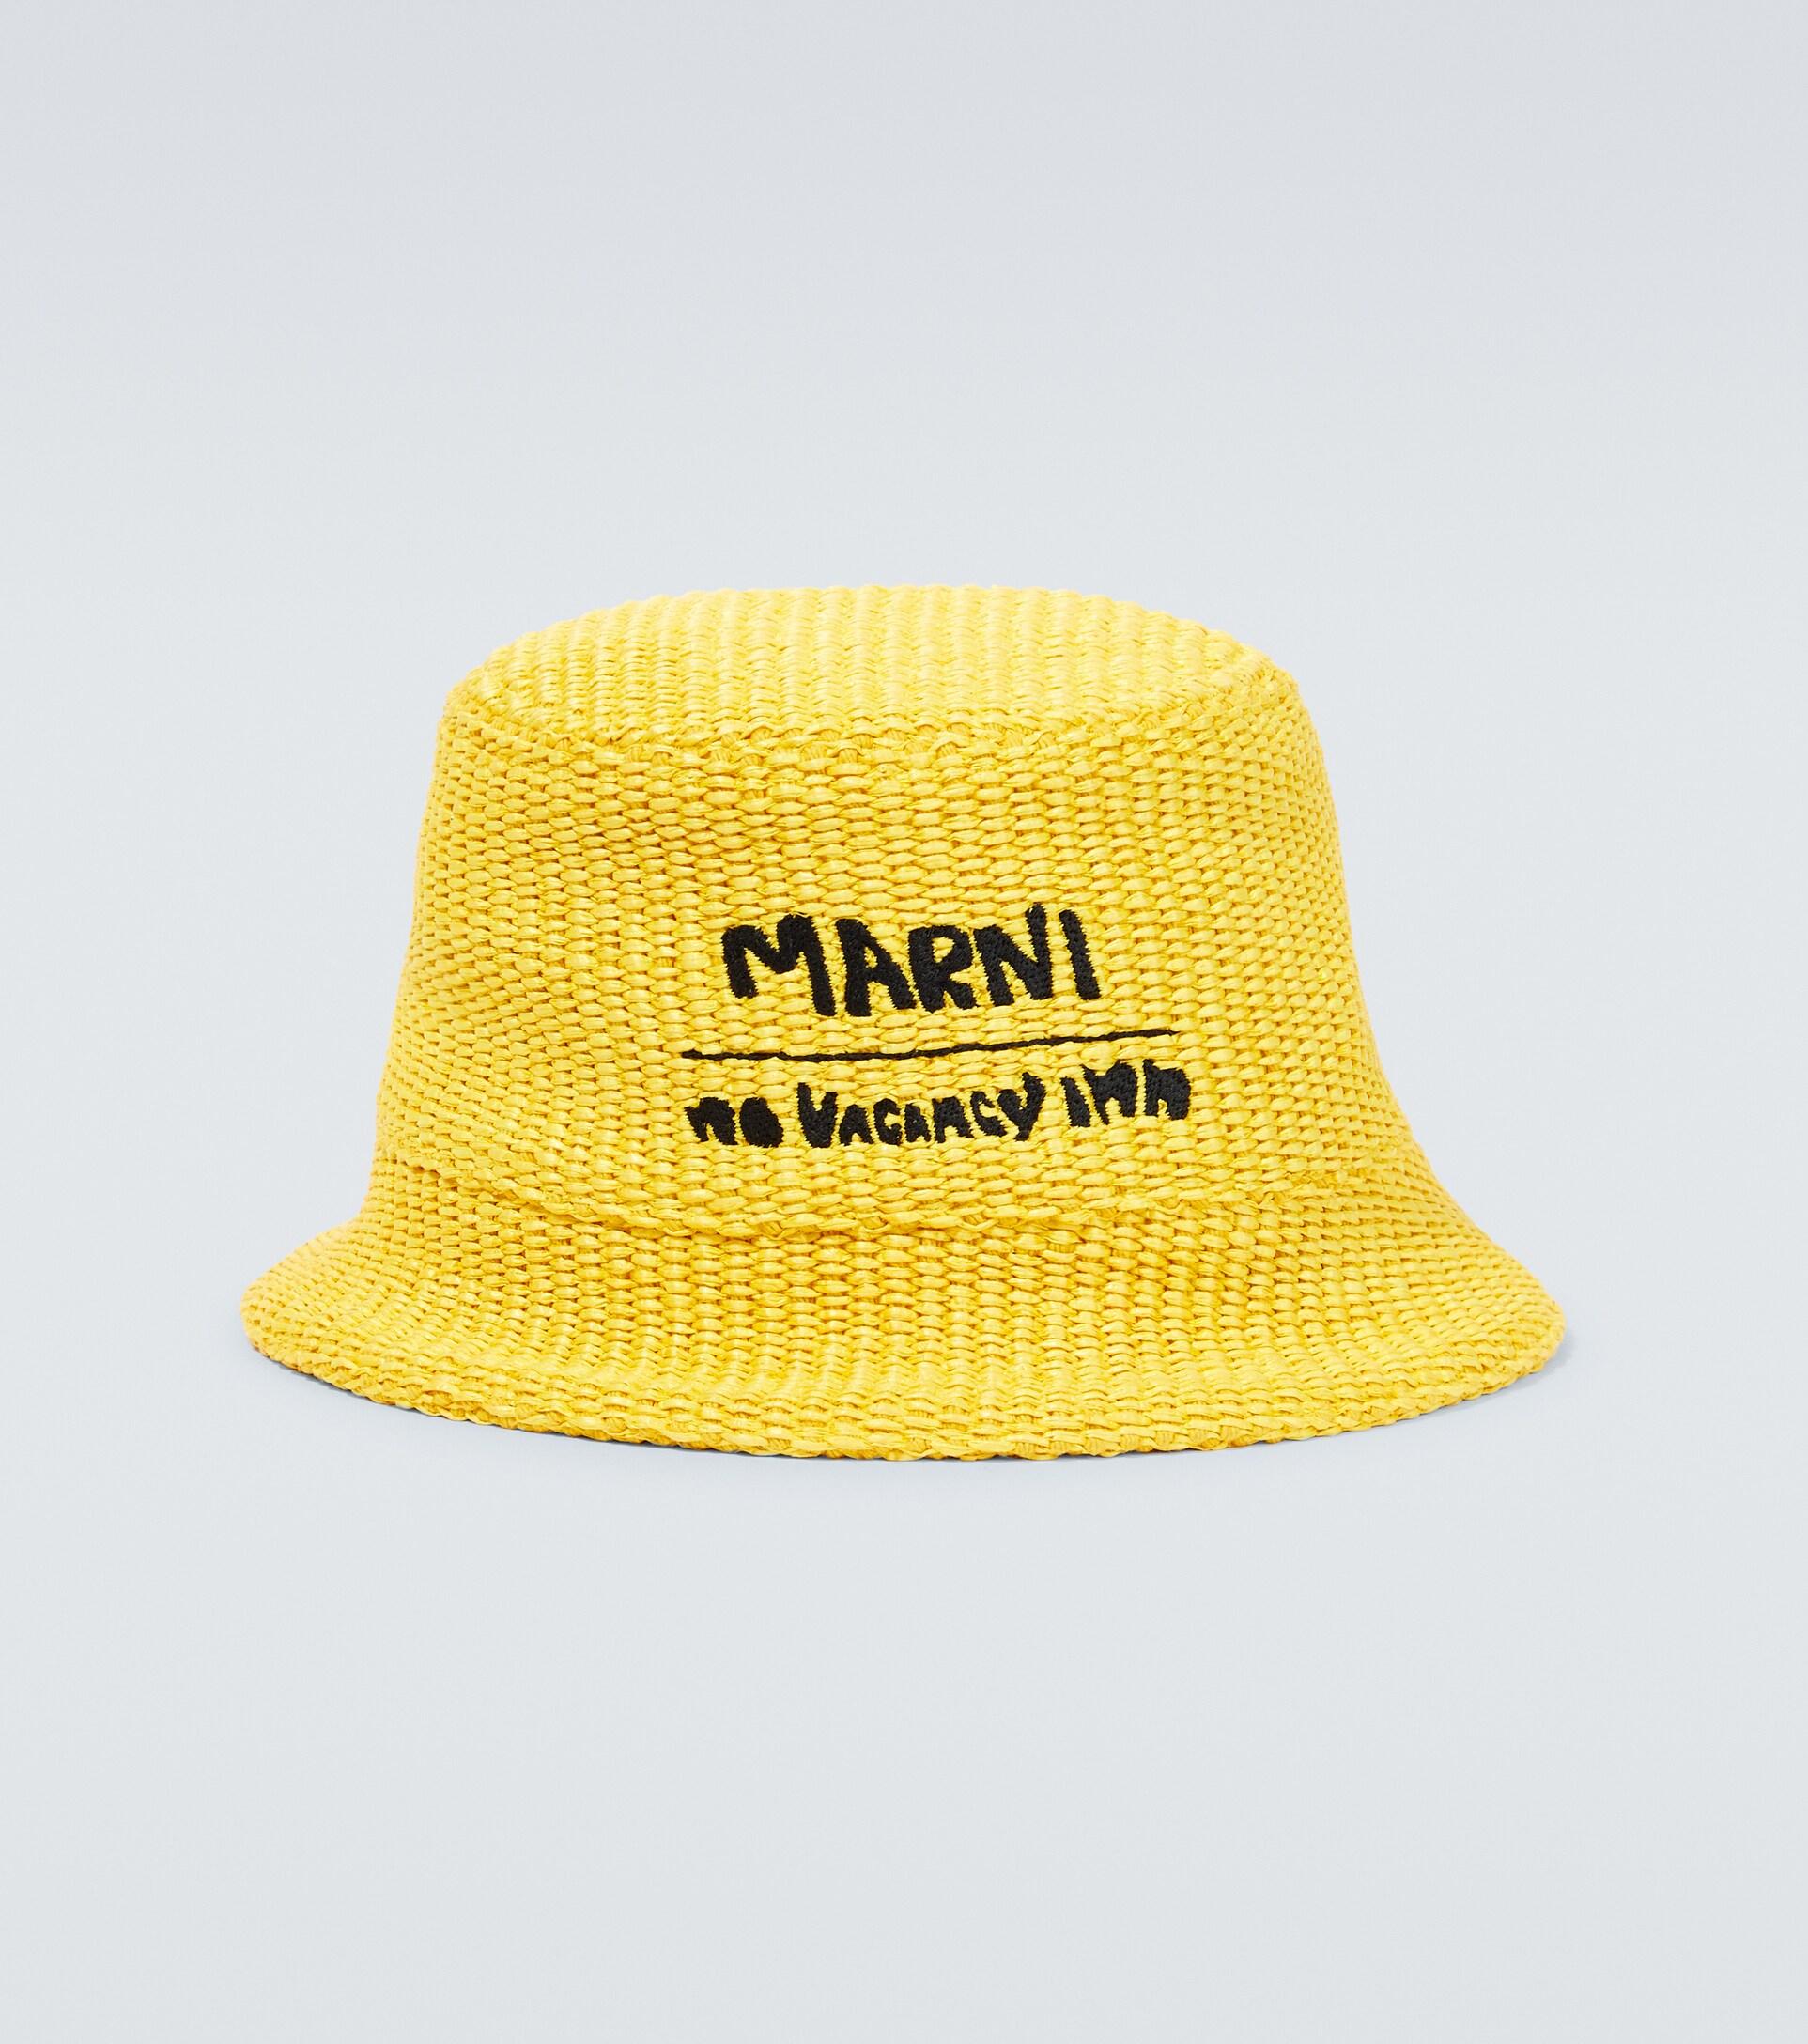 Marni X No Vacancy Inn Embroidered Bucket Hat in Yellow for Men | Lyst